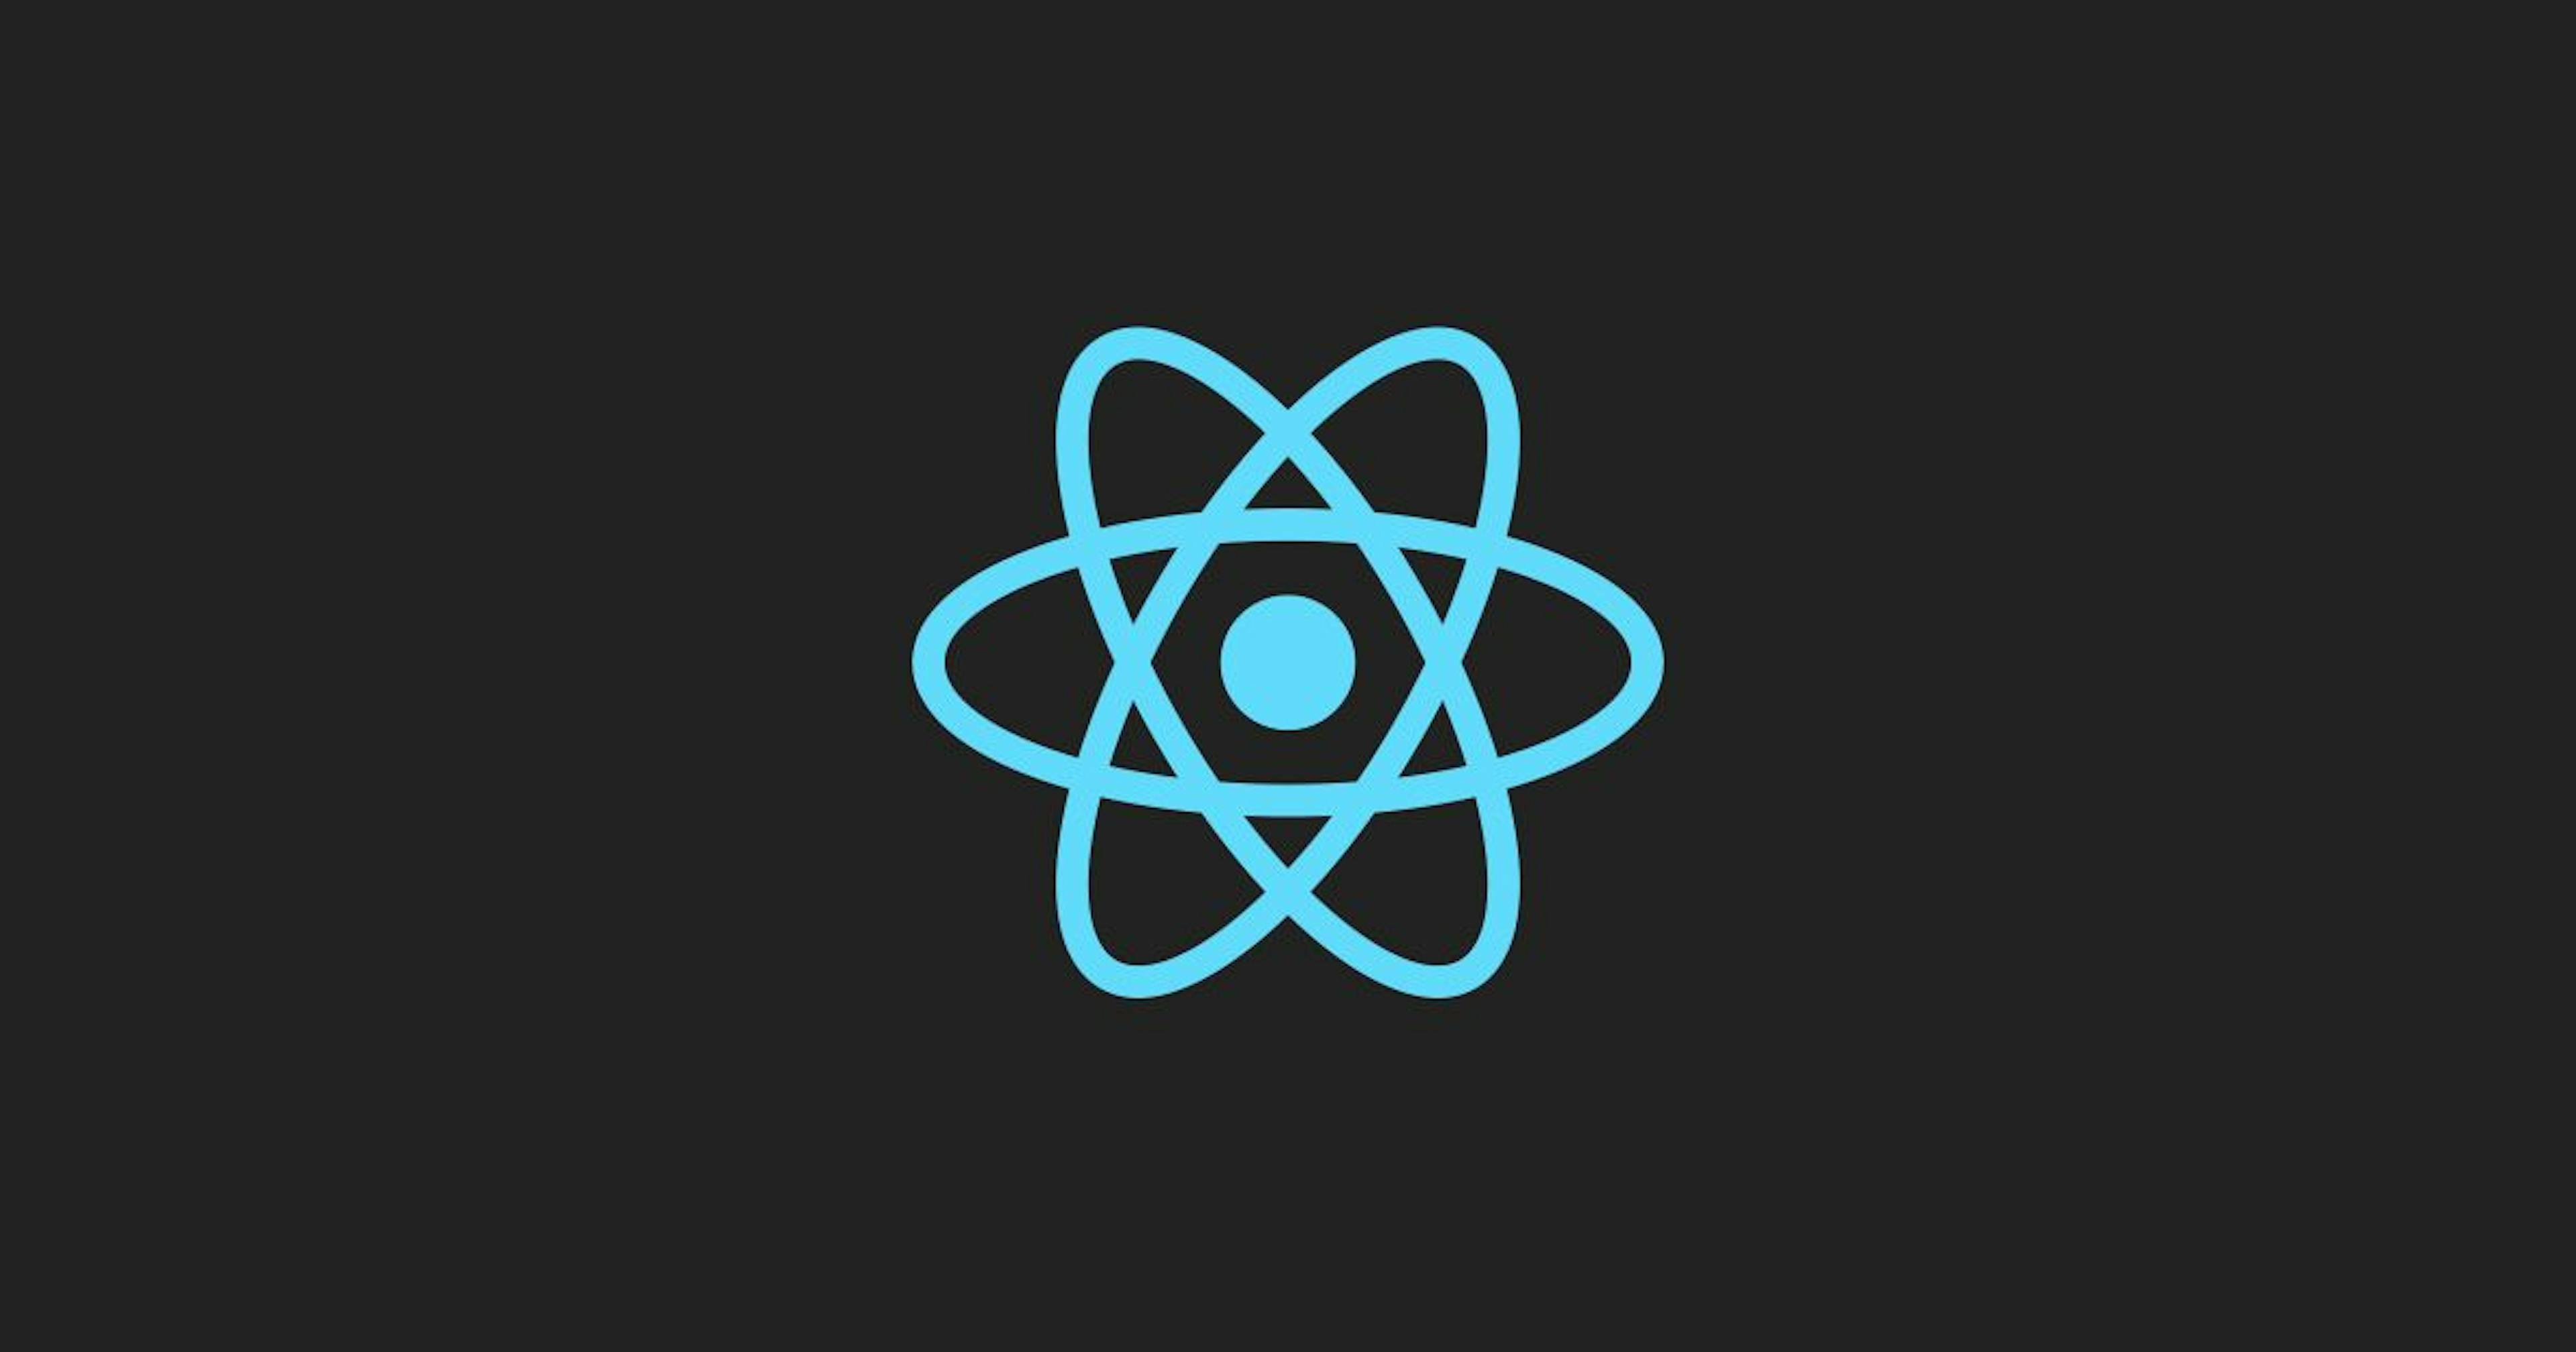 featured image - React useRef Hook Explained with Examples